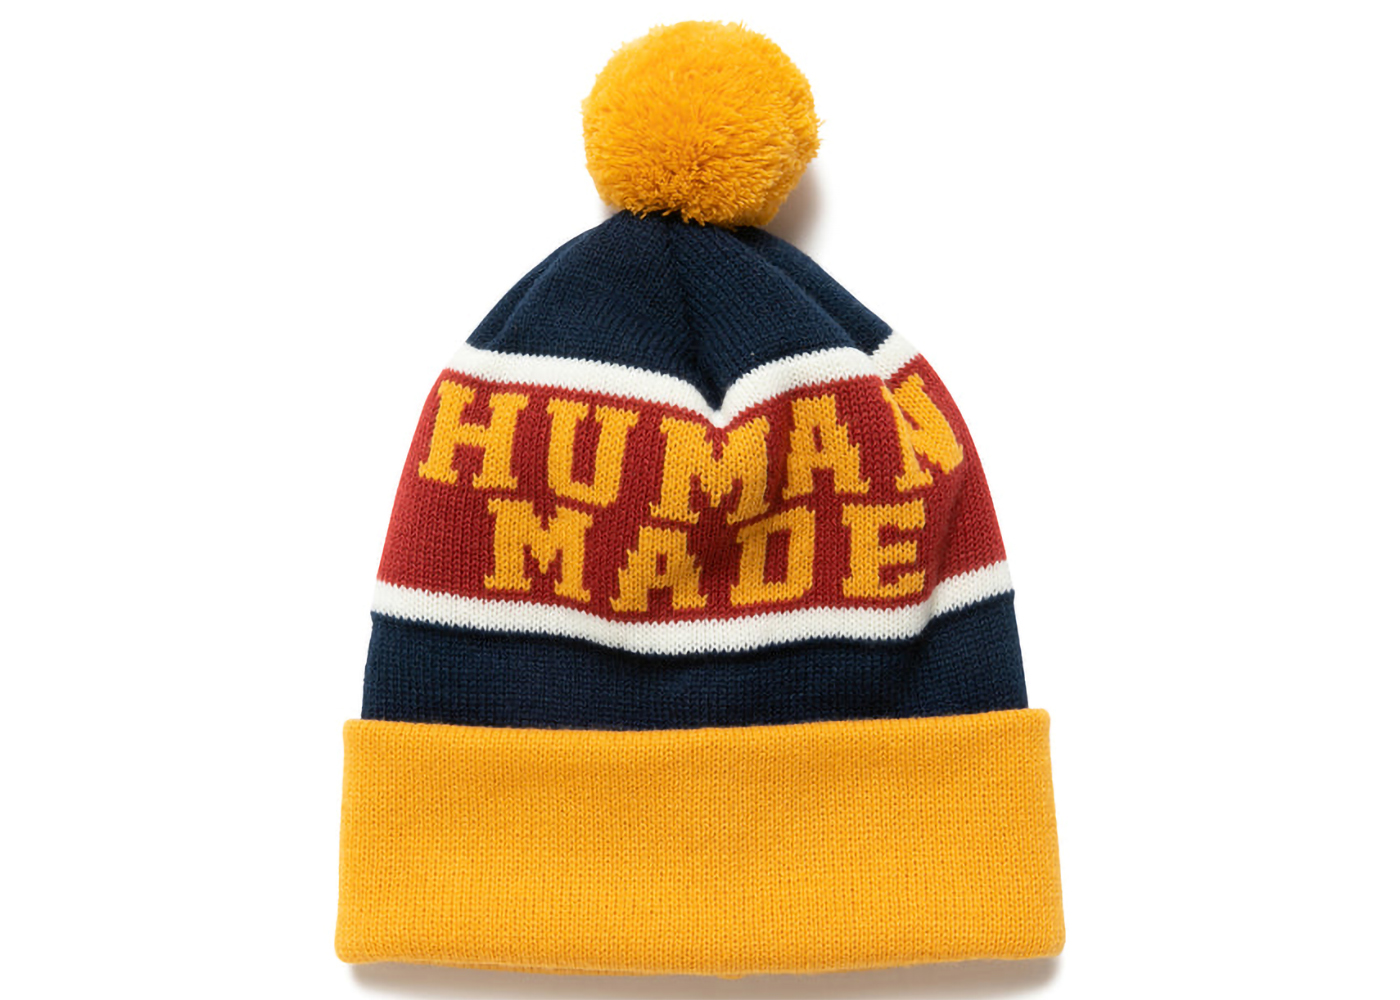 Human Made Cable Pop Beanie White - FW22 - US